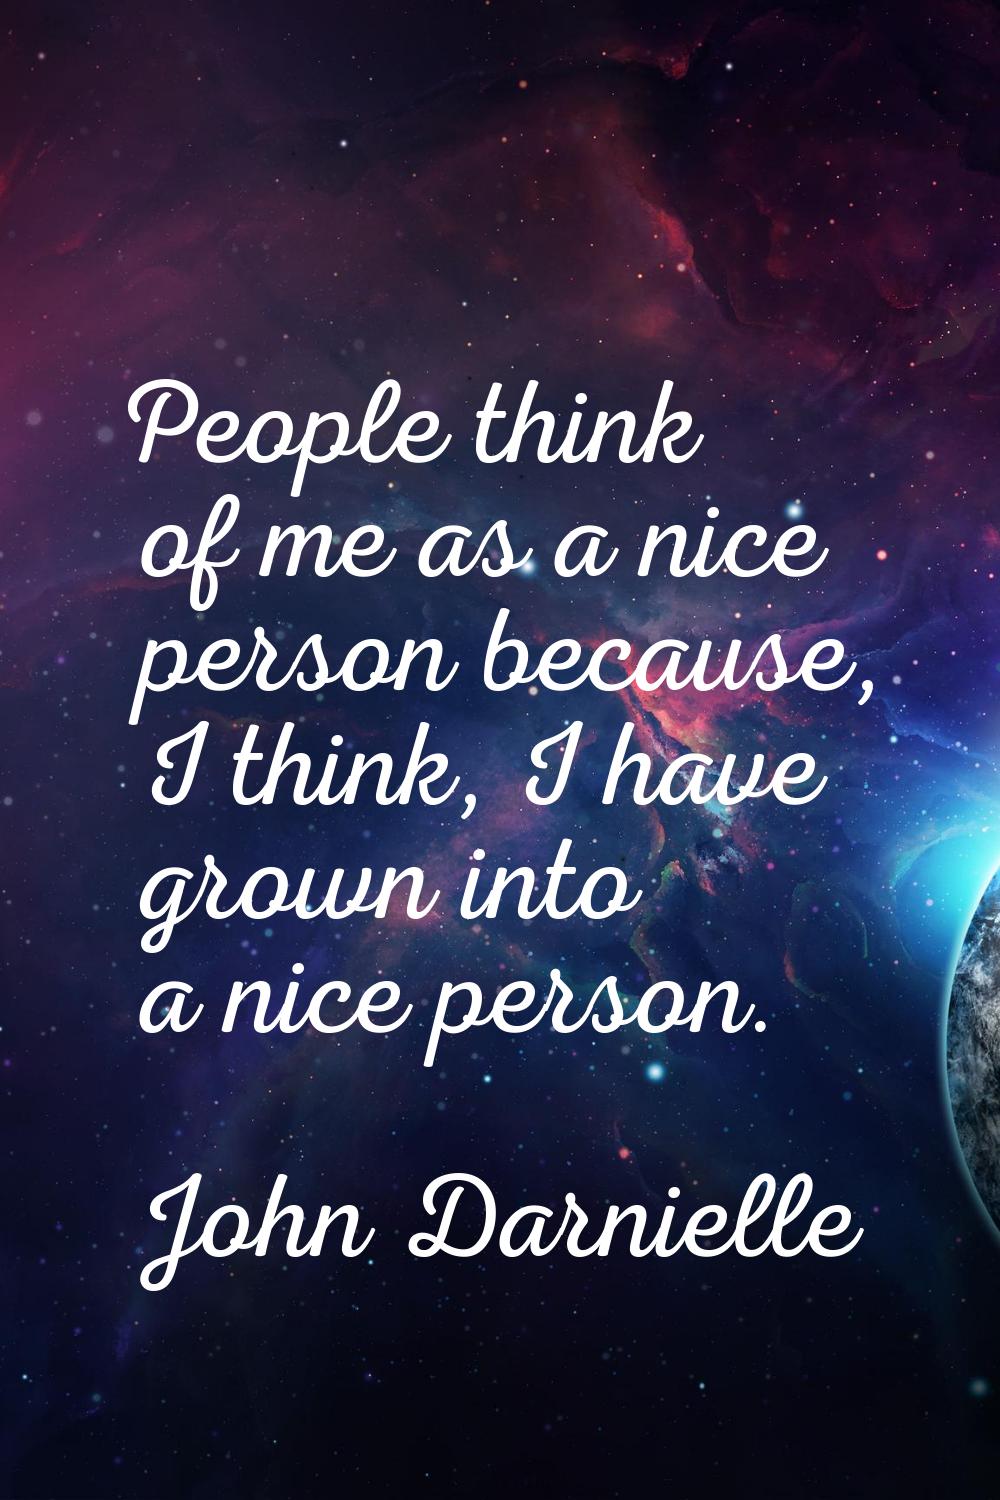 People think of me as a nice person because, I think, I have grown into a nice person.